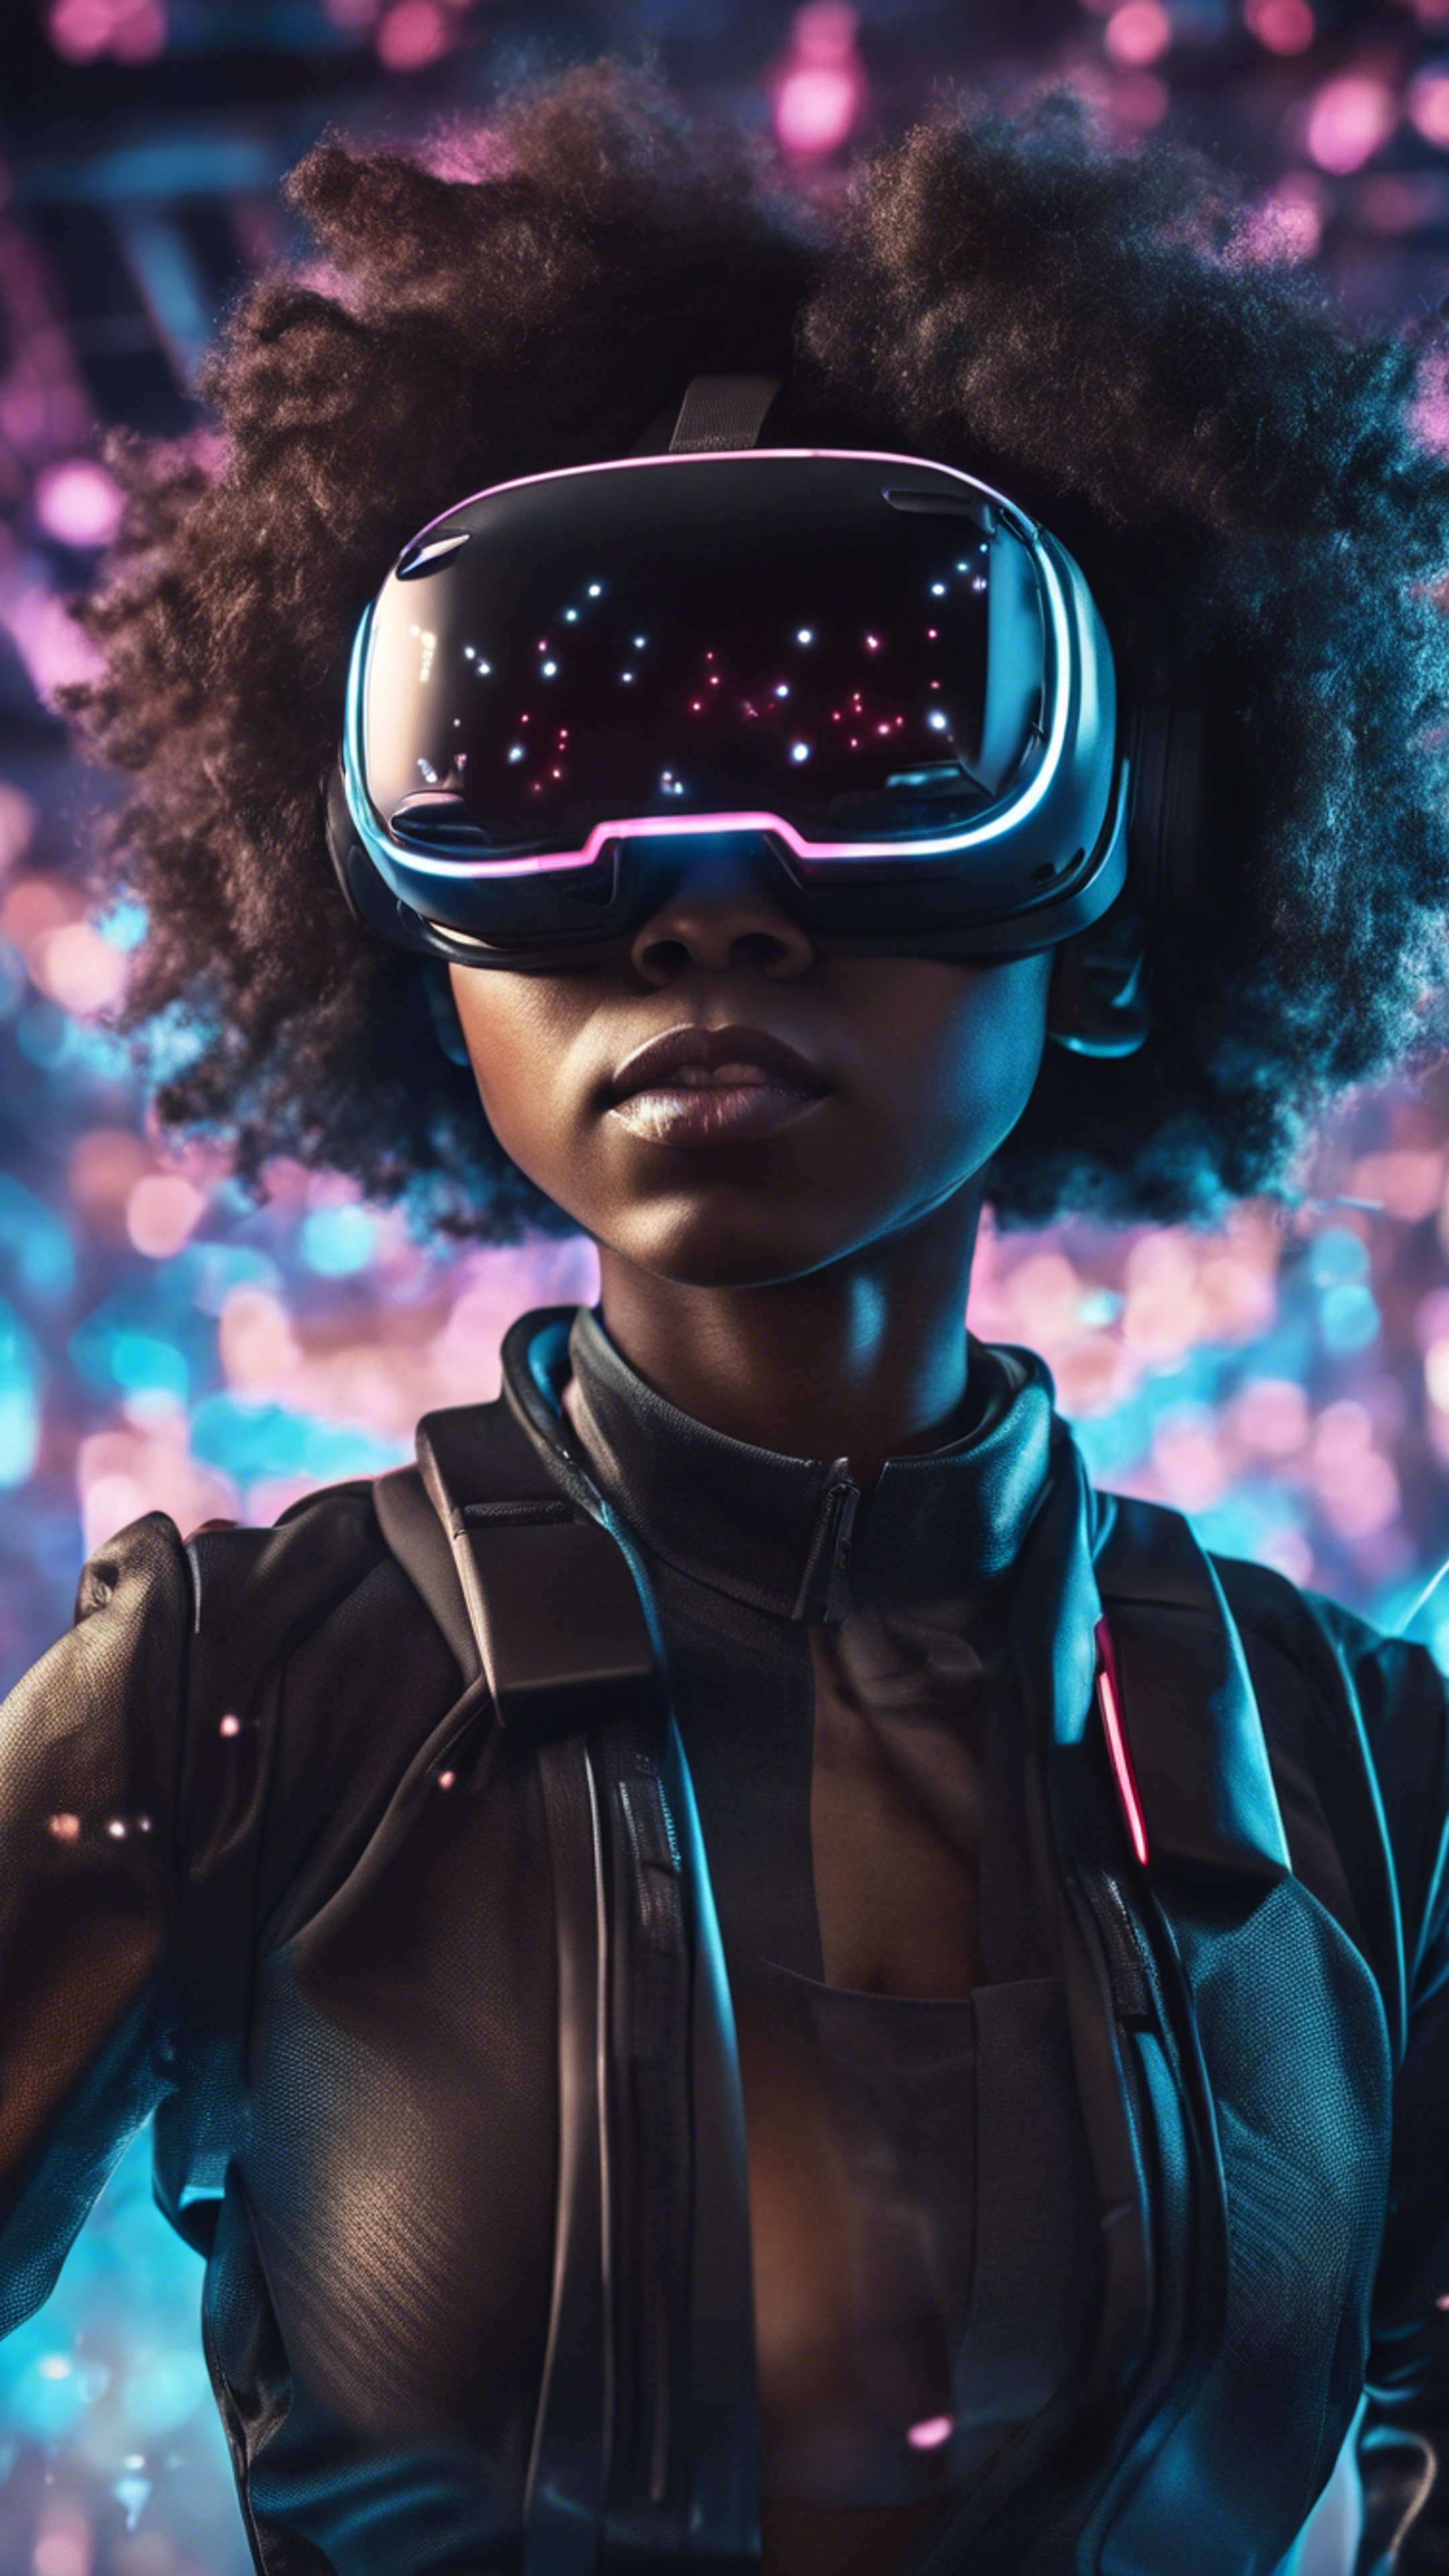 A black girl wearing a virtual reality headset completely immersed in a futuristic cyberspace. Wallpaper[0f80f55163a8478e8707]